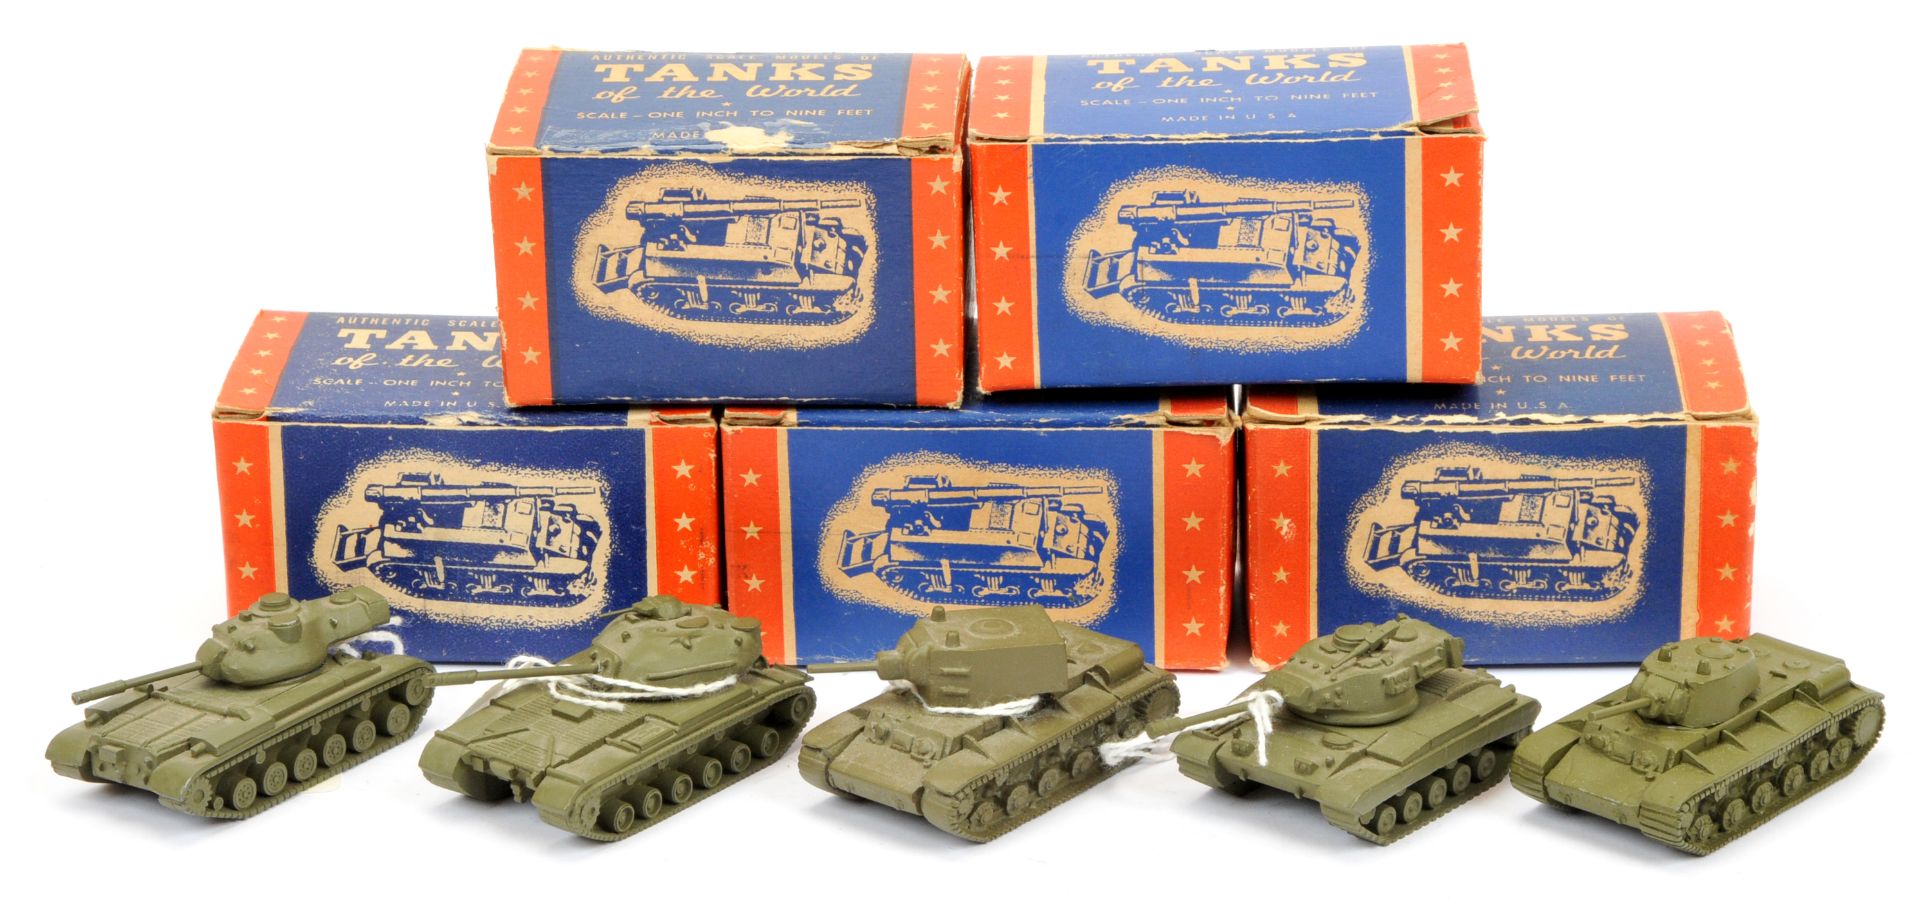 Authenticast diecast Military vehicles. group of 5 - (1) Russian Heavy tank (2) US Heavy tank